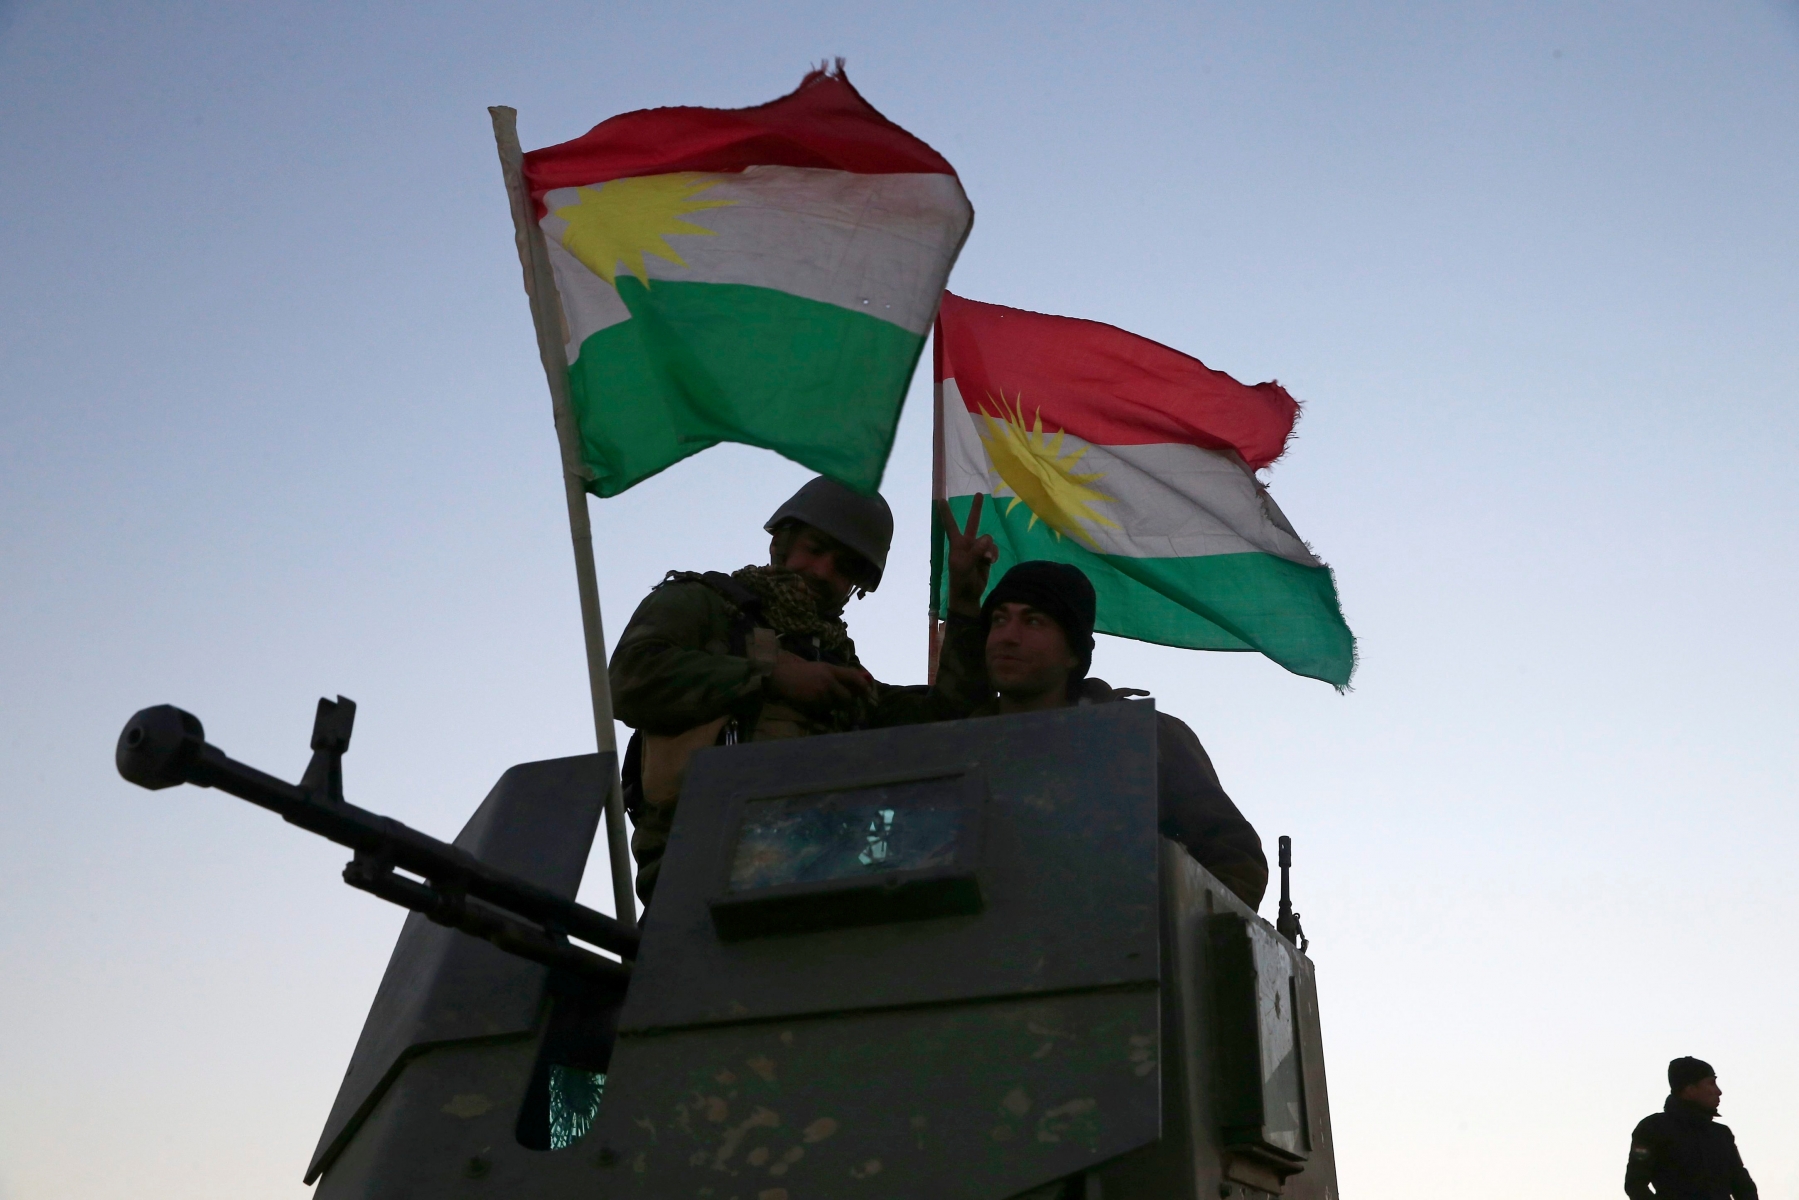 Kurdish Peshmerga fighters stand on top of a military vehicle as they advance towards villages surrounding Mosul, in Khazer, about 30 kilometers (19 miles) east of Mosul, Iraq, Monday, Oct. 17, 2016. The Iraqi military and the country's Kurdish forces say they launched operations to the south and east of militant-held Mosul early Monday morning. (AP Photo/Bram Janssen) Mideast Iraq